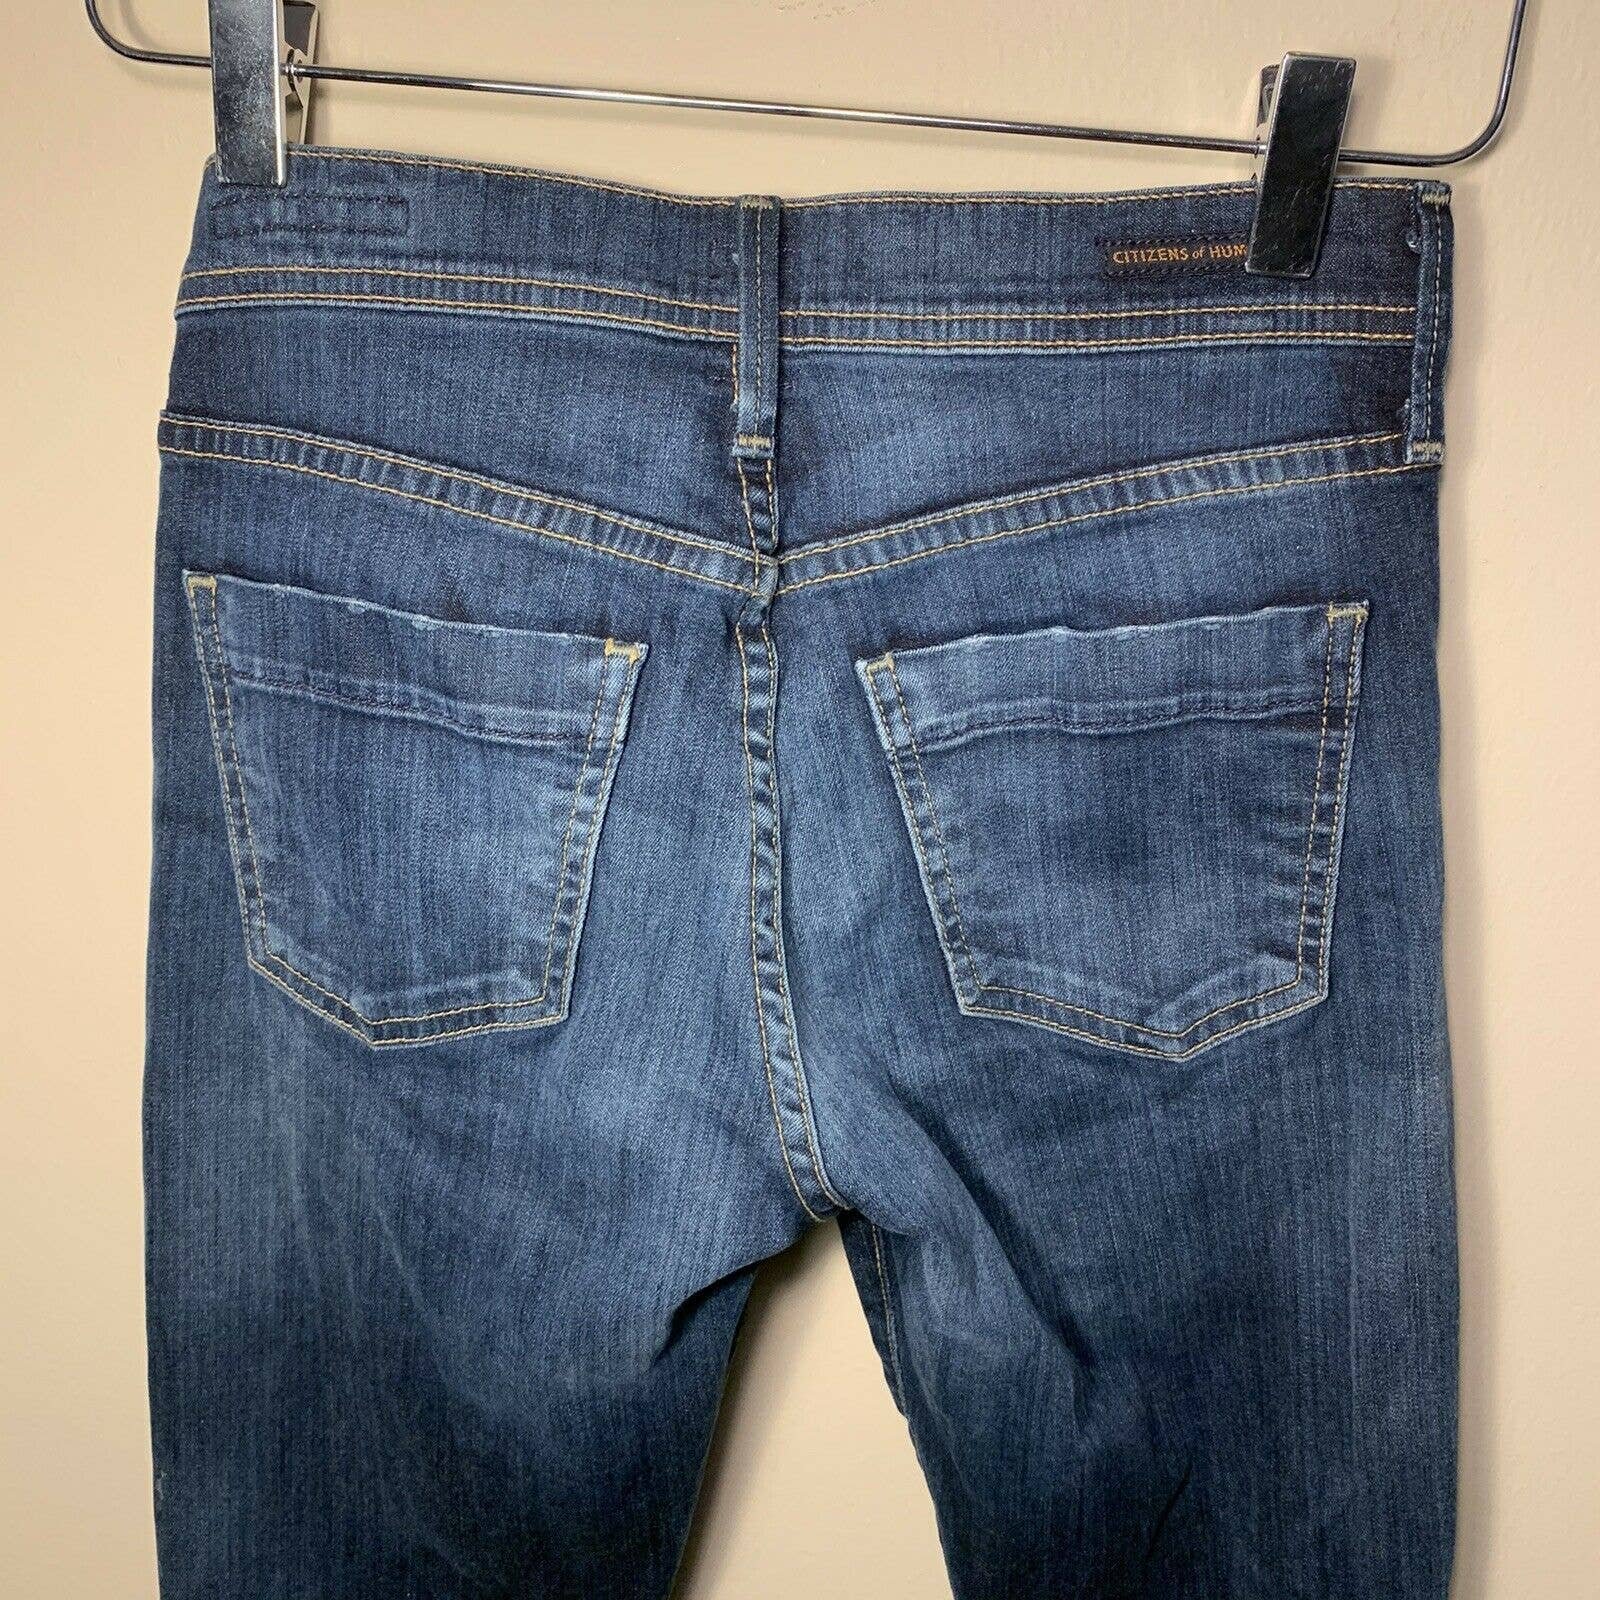 Exclusive Citizens of Humanity Dani Cropped Straight Leg Jeans Size 24 COH P81HDMiWX Low Price